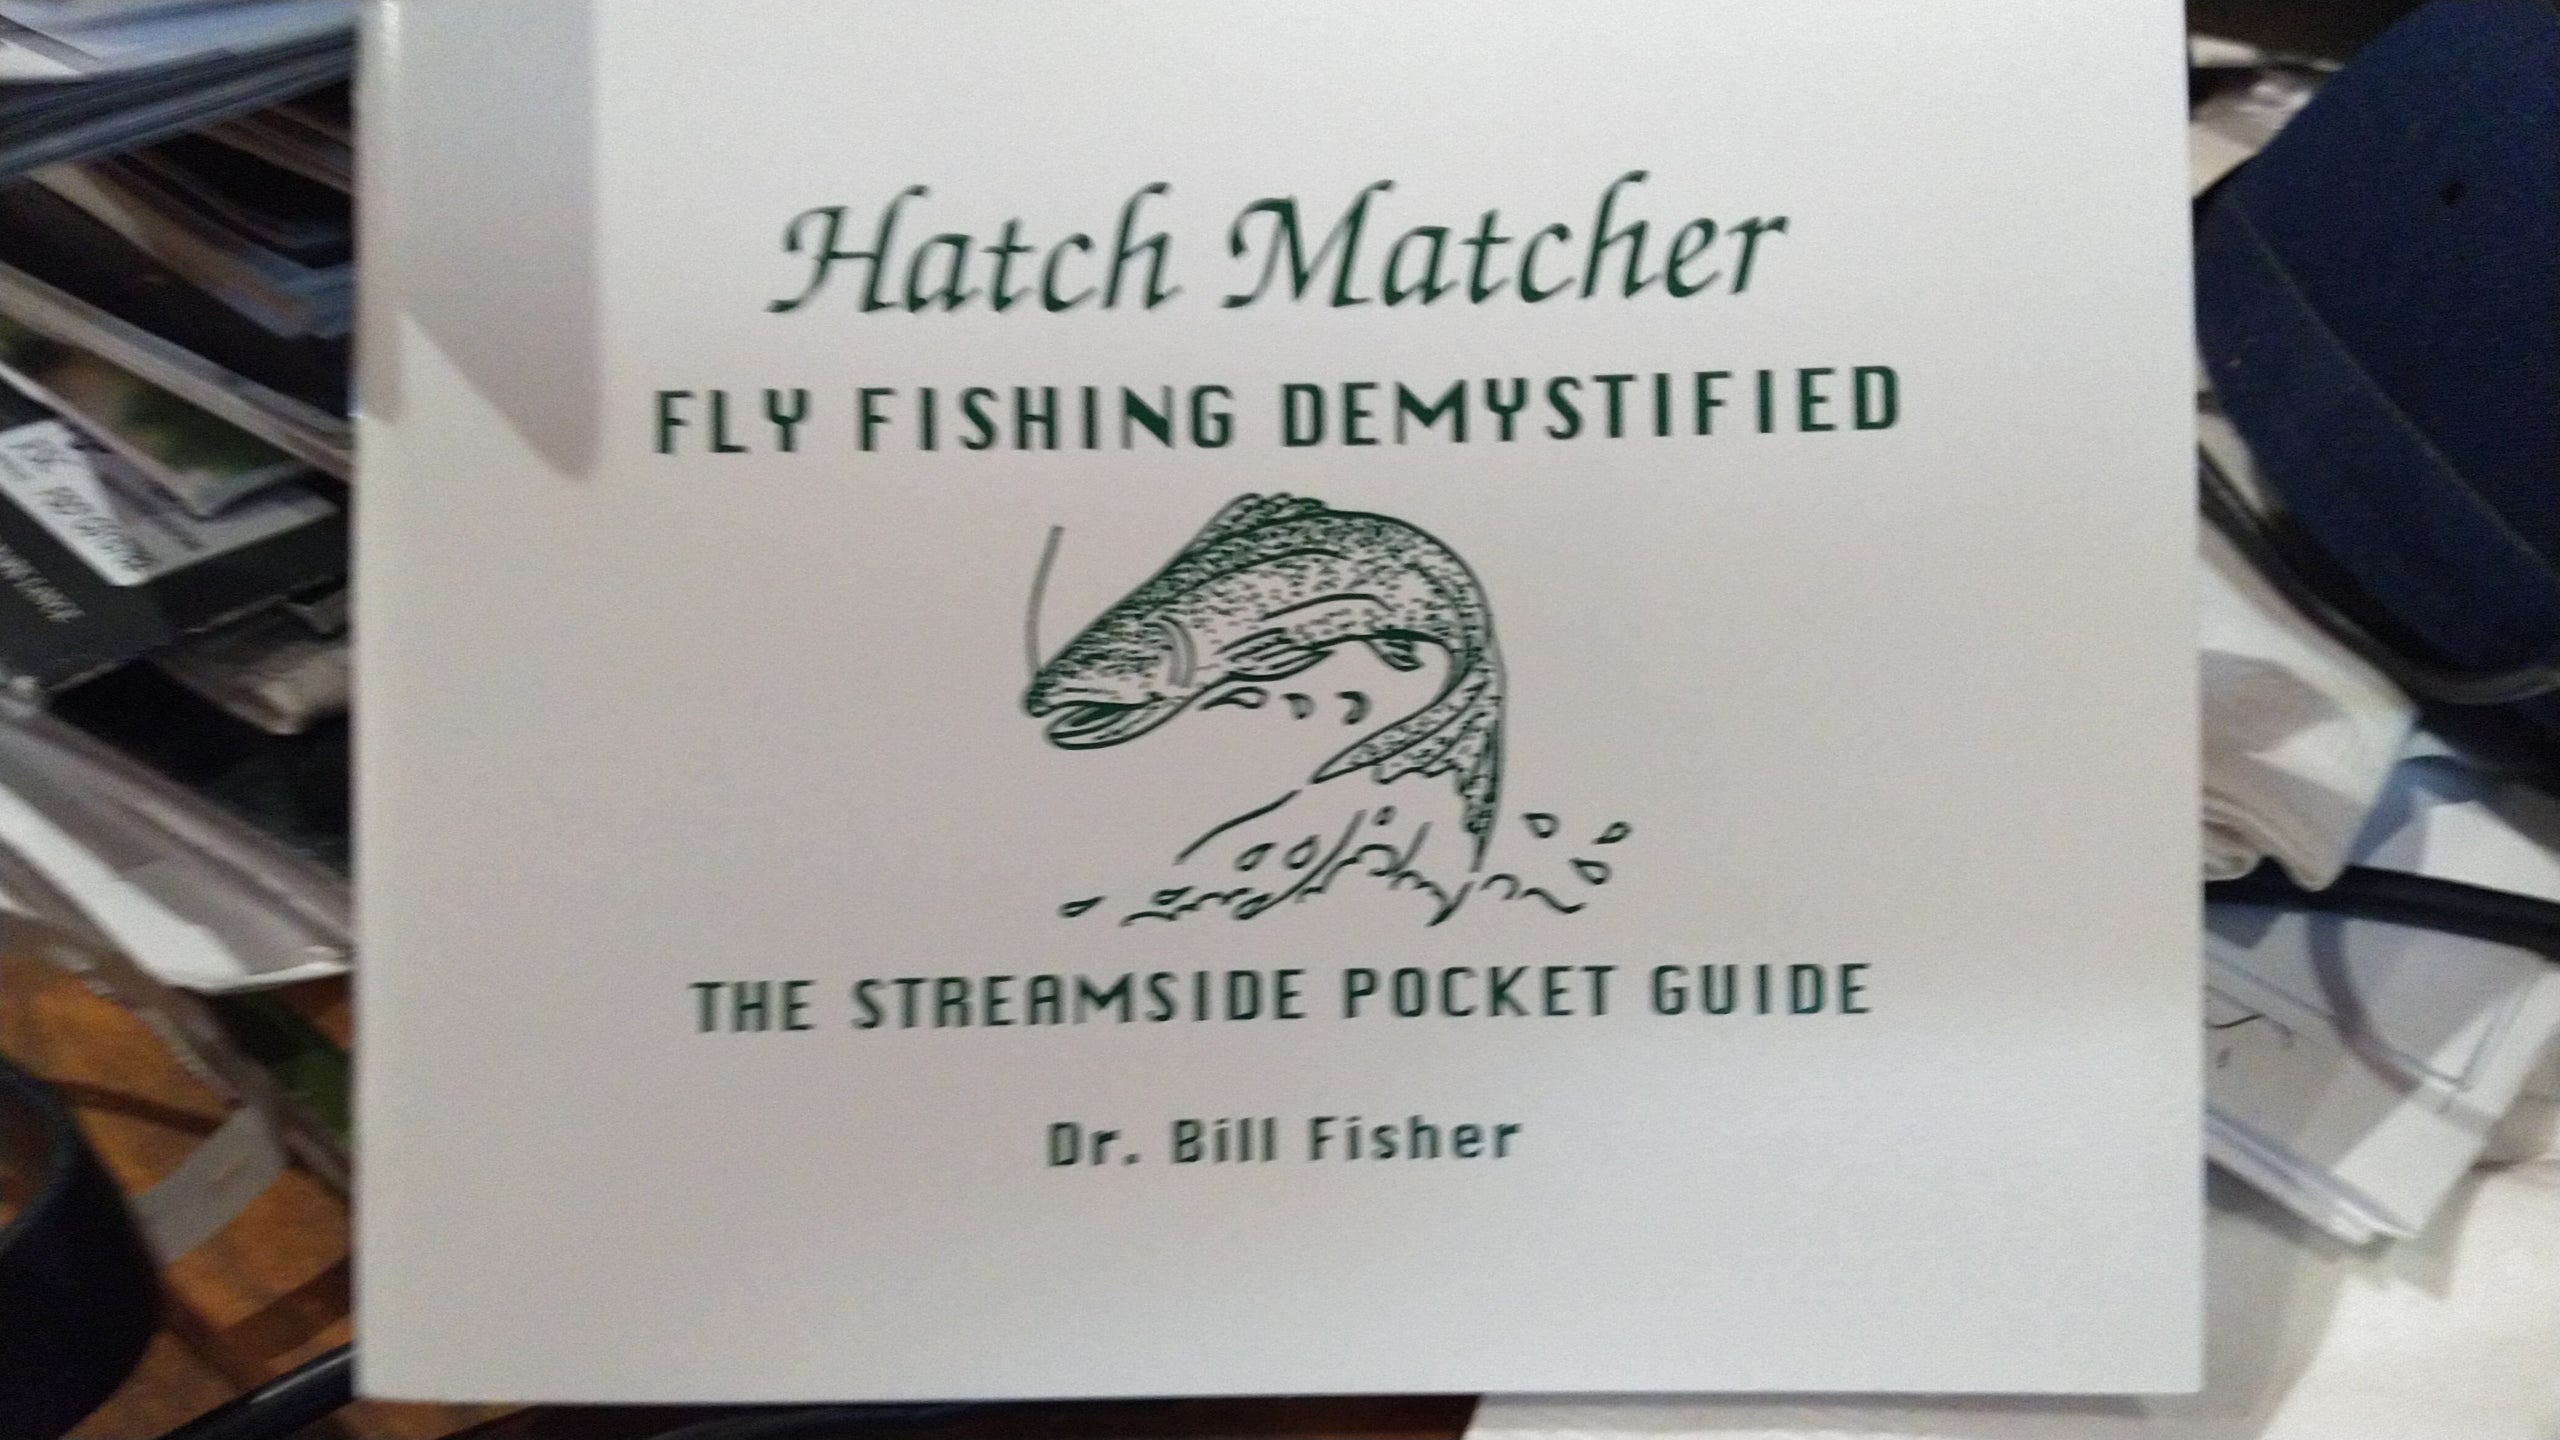 Hatch Matcher-Fly Fishing Demystefied-Streamside Pocket Guide